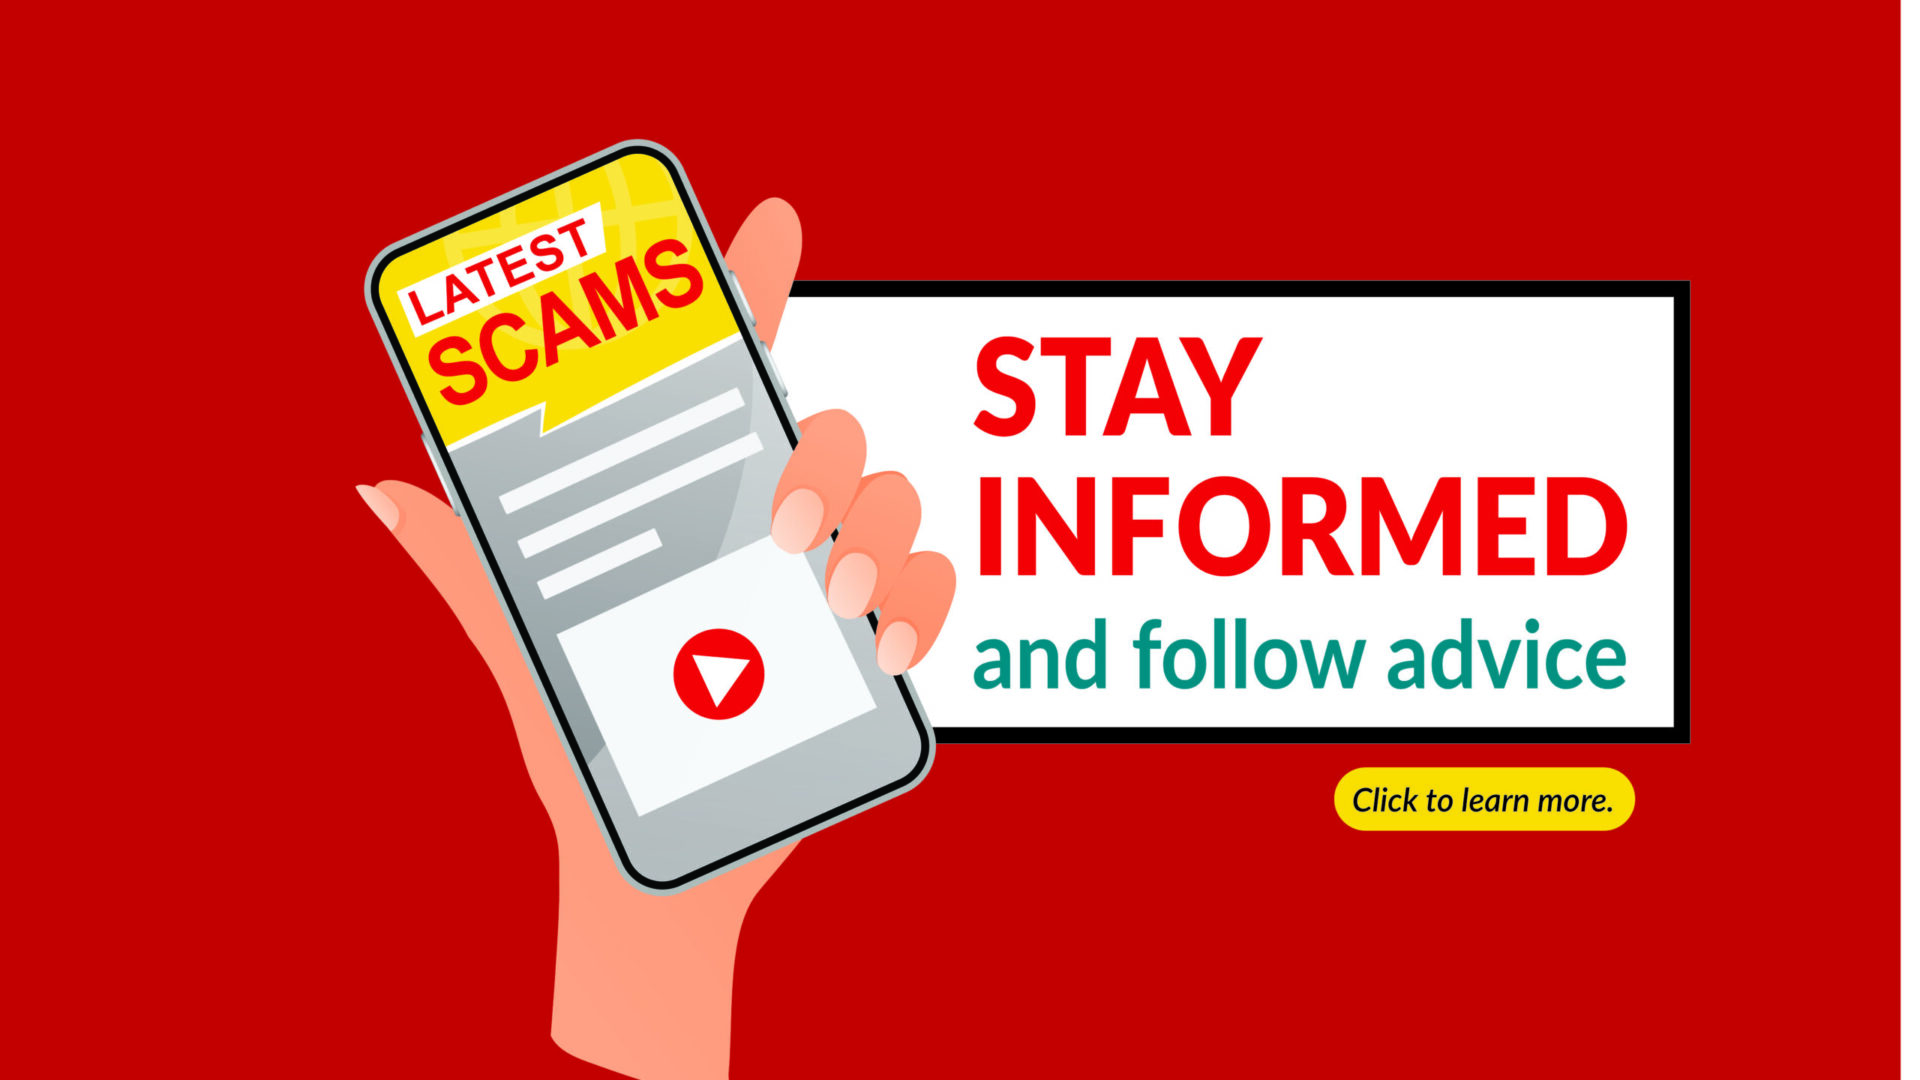 Red attention grabbing. Hand holding cellphone says Latest Scams, stay informed and follow advice. Click for more info.